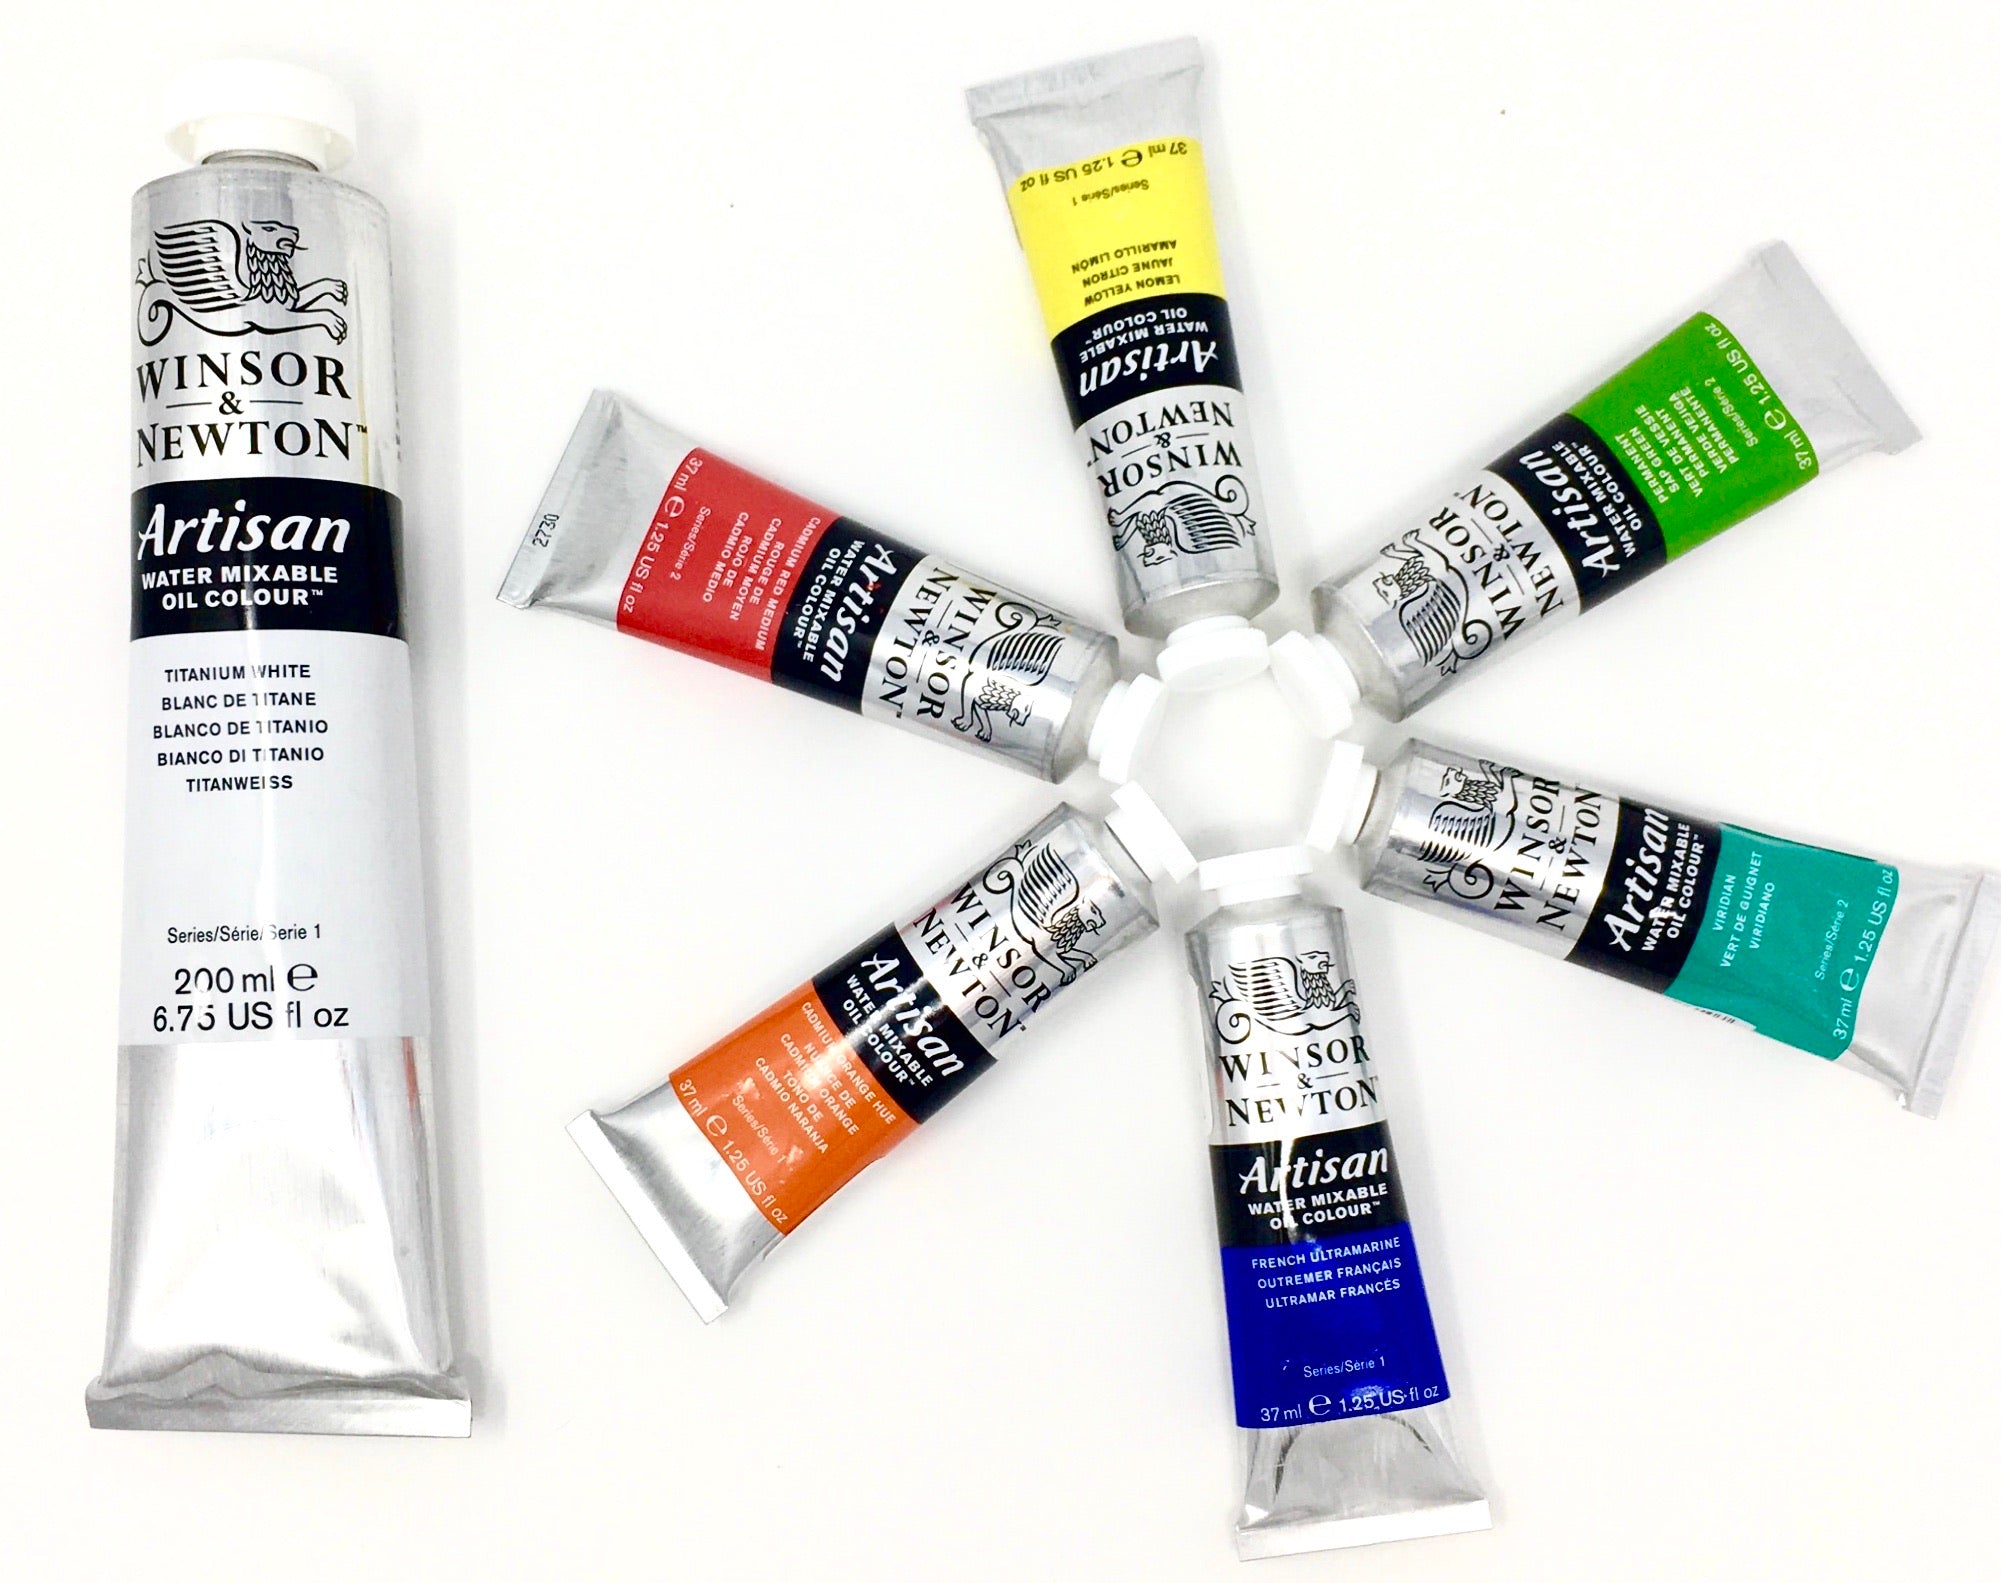 Artisan Water Mixable Oil Color 37ml